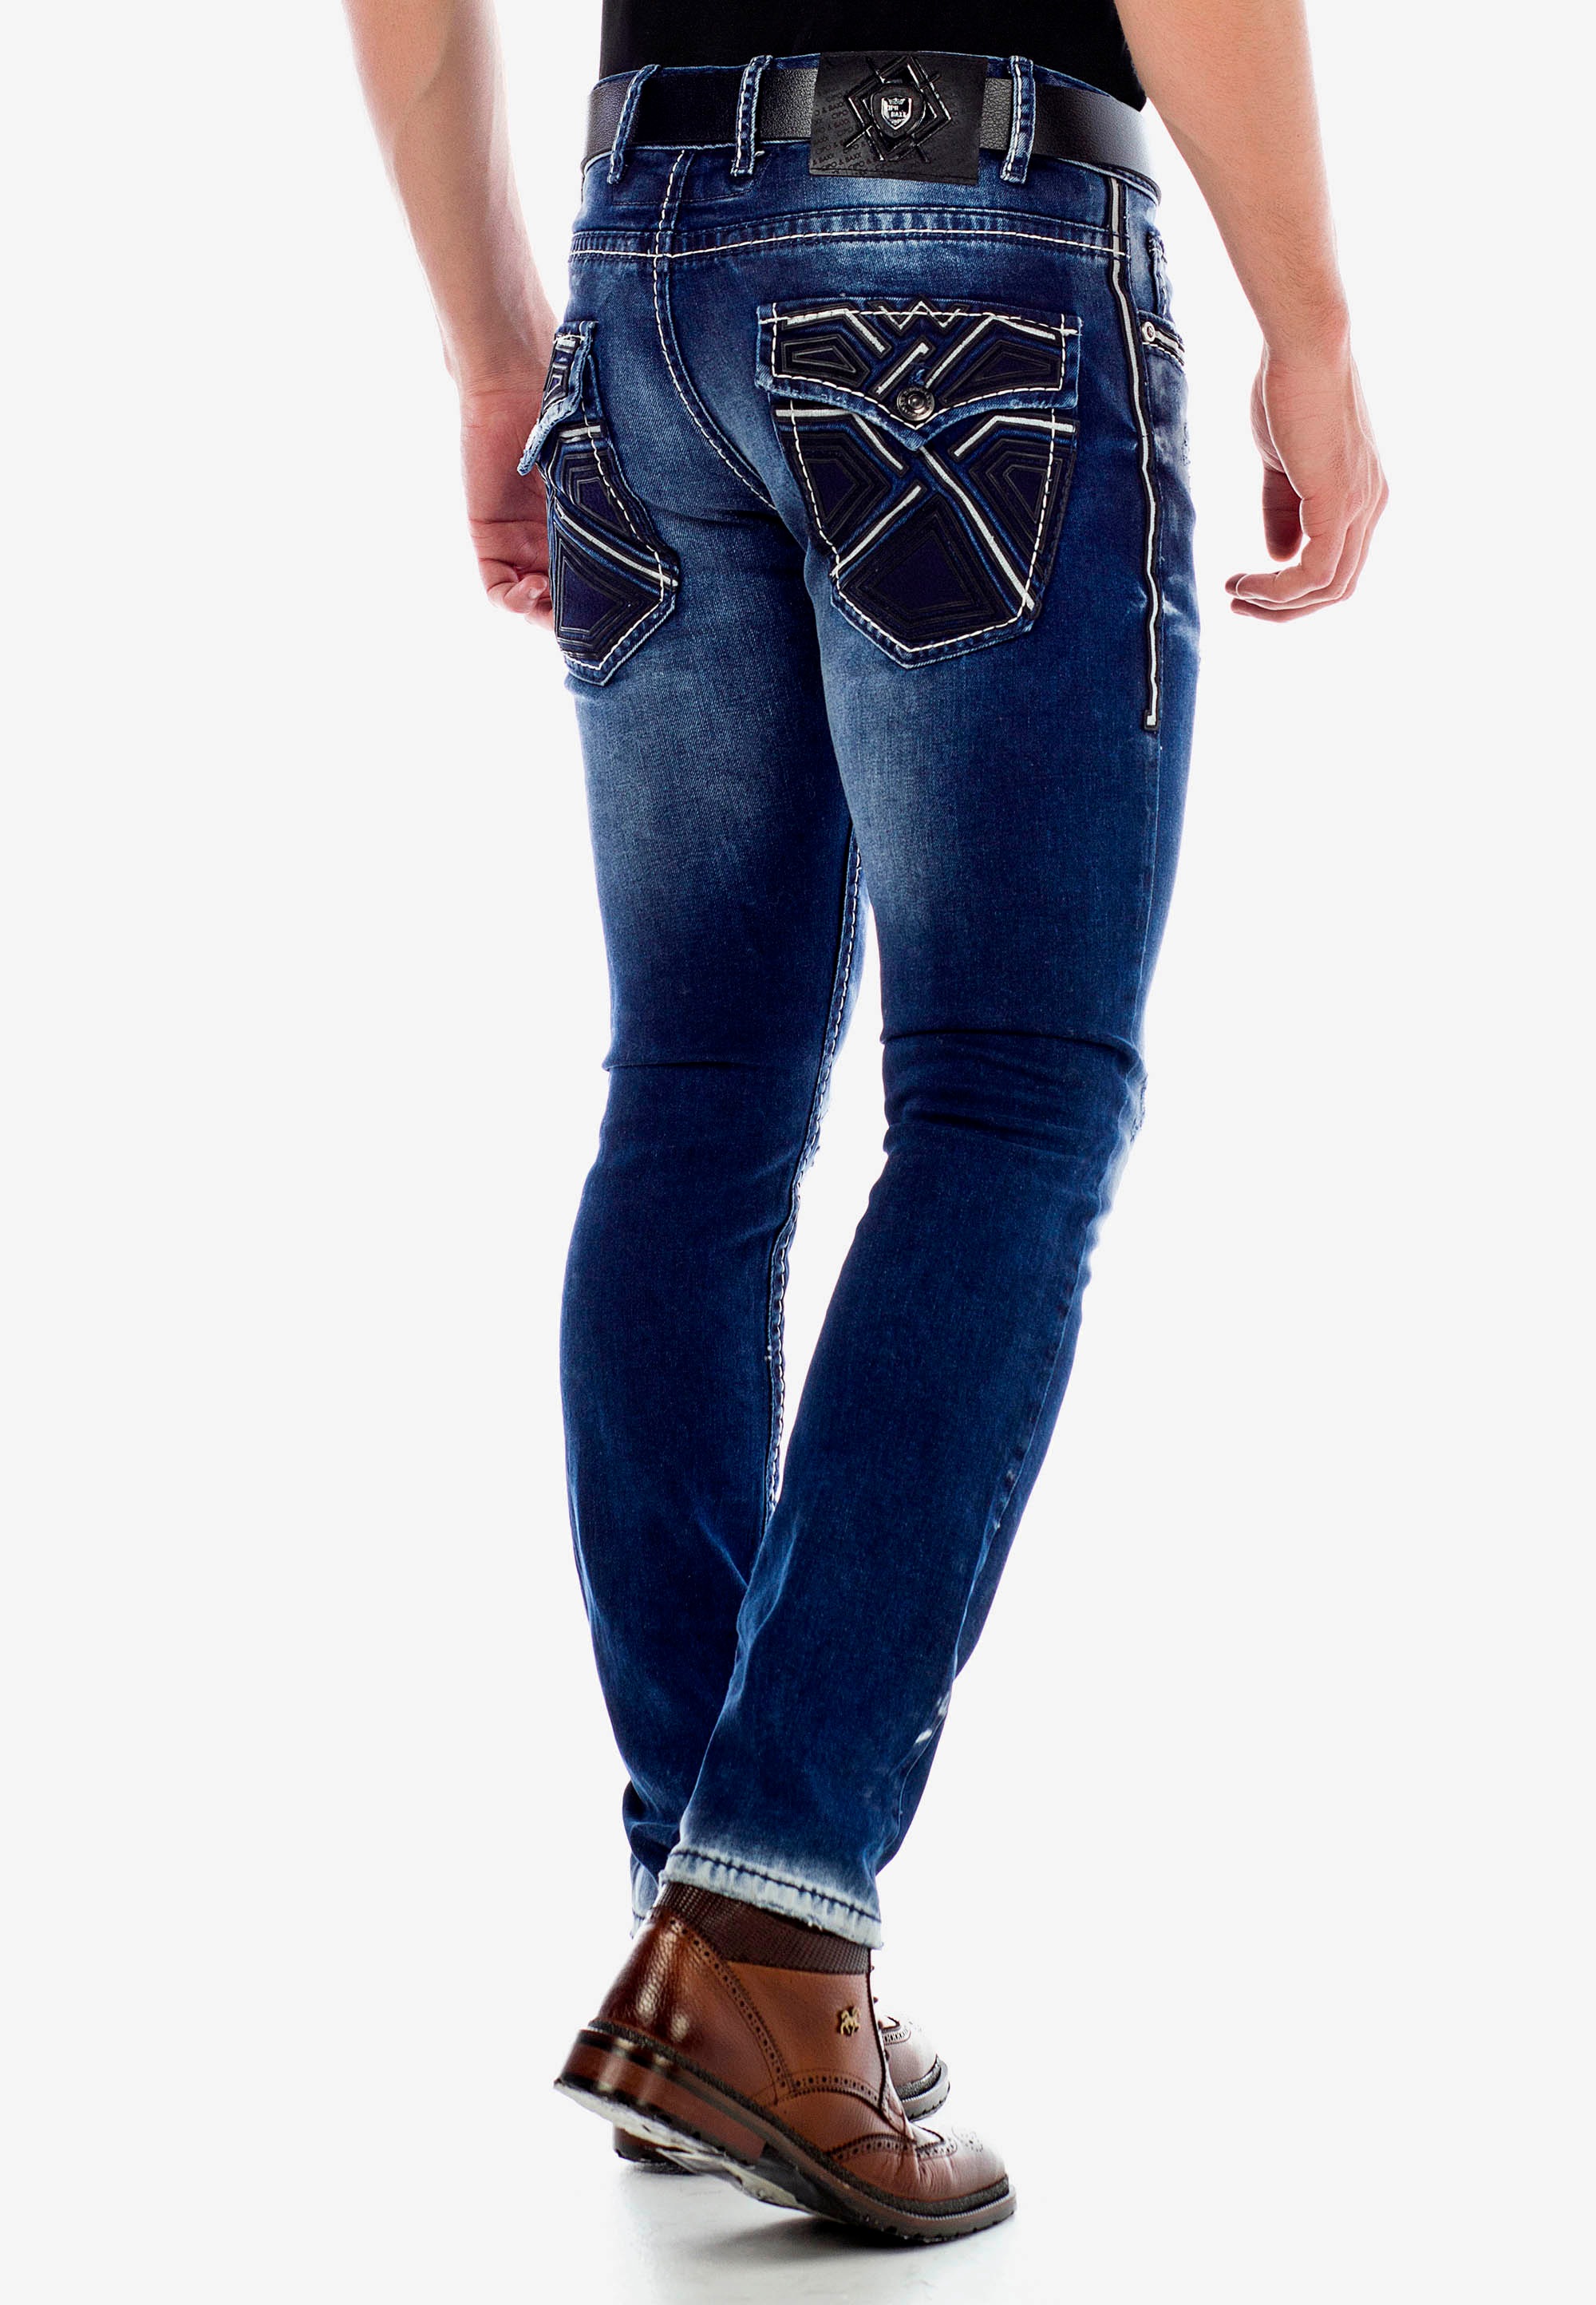 Cipo & Baxx Slim-fit-Jeans, im Worn Washed Look in Straight Fit